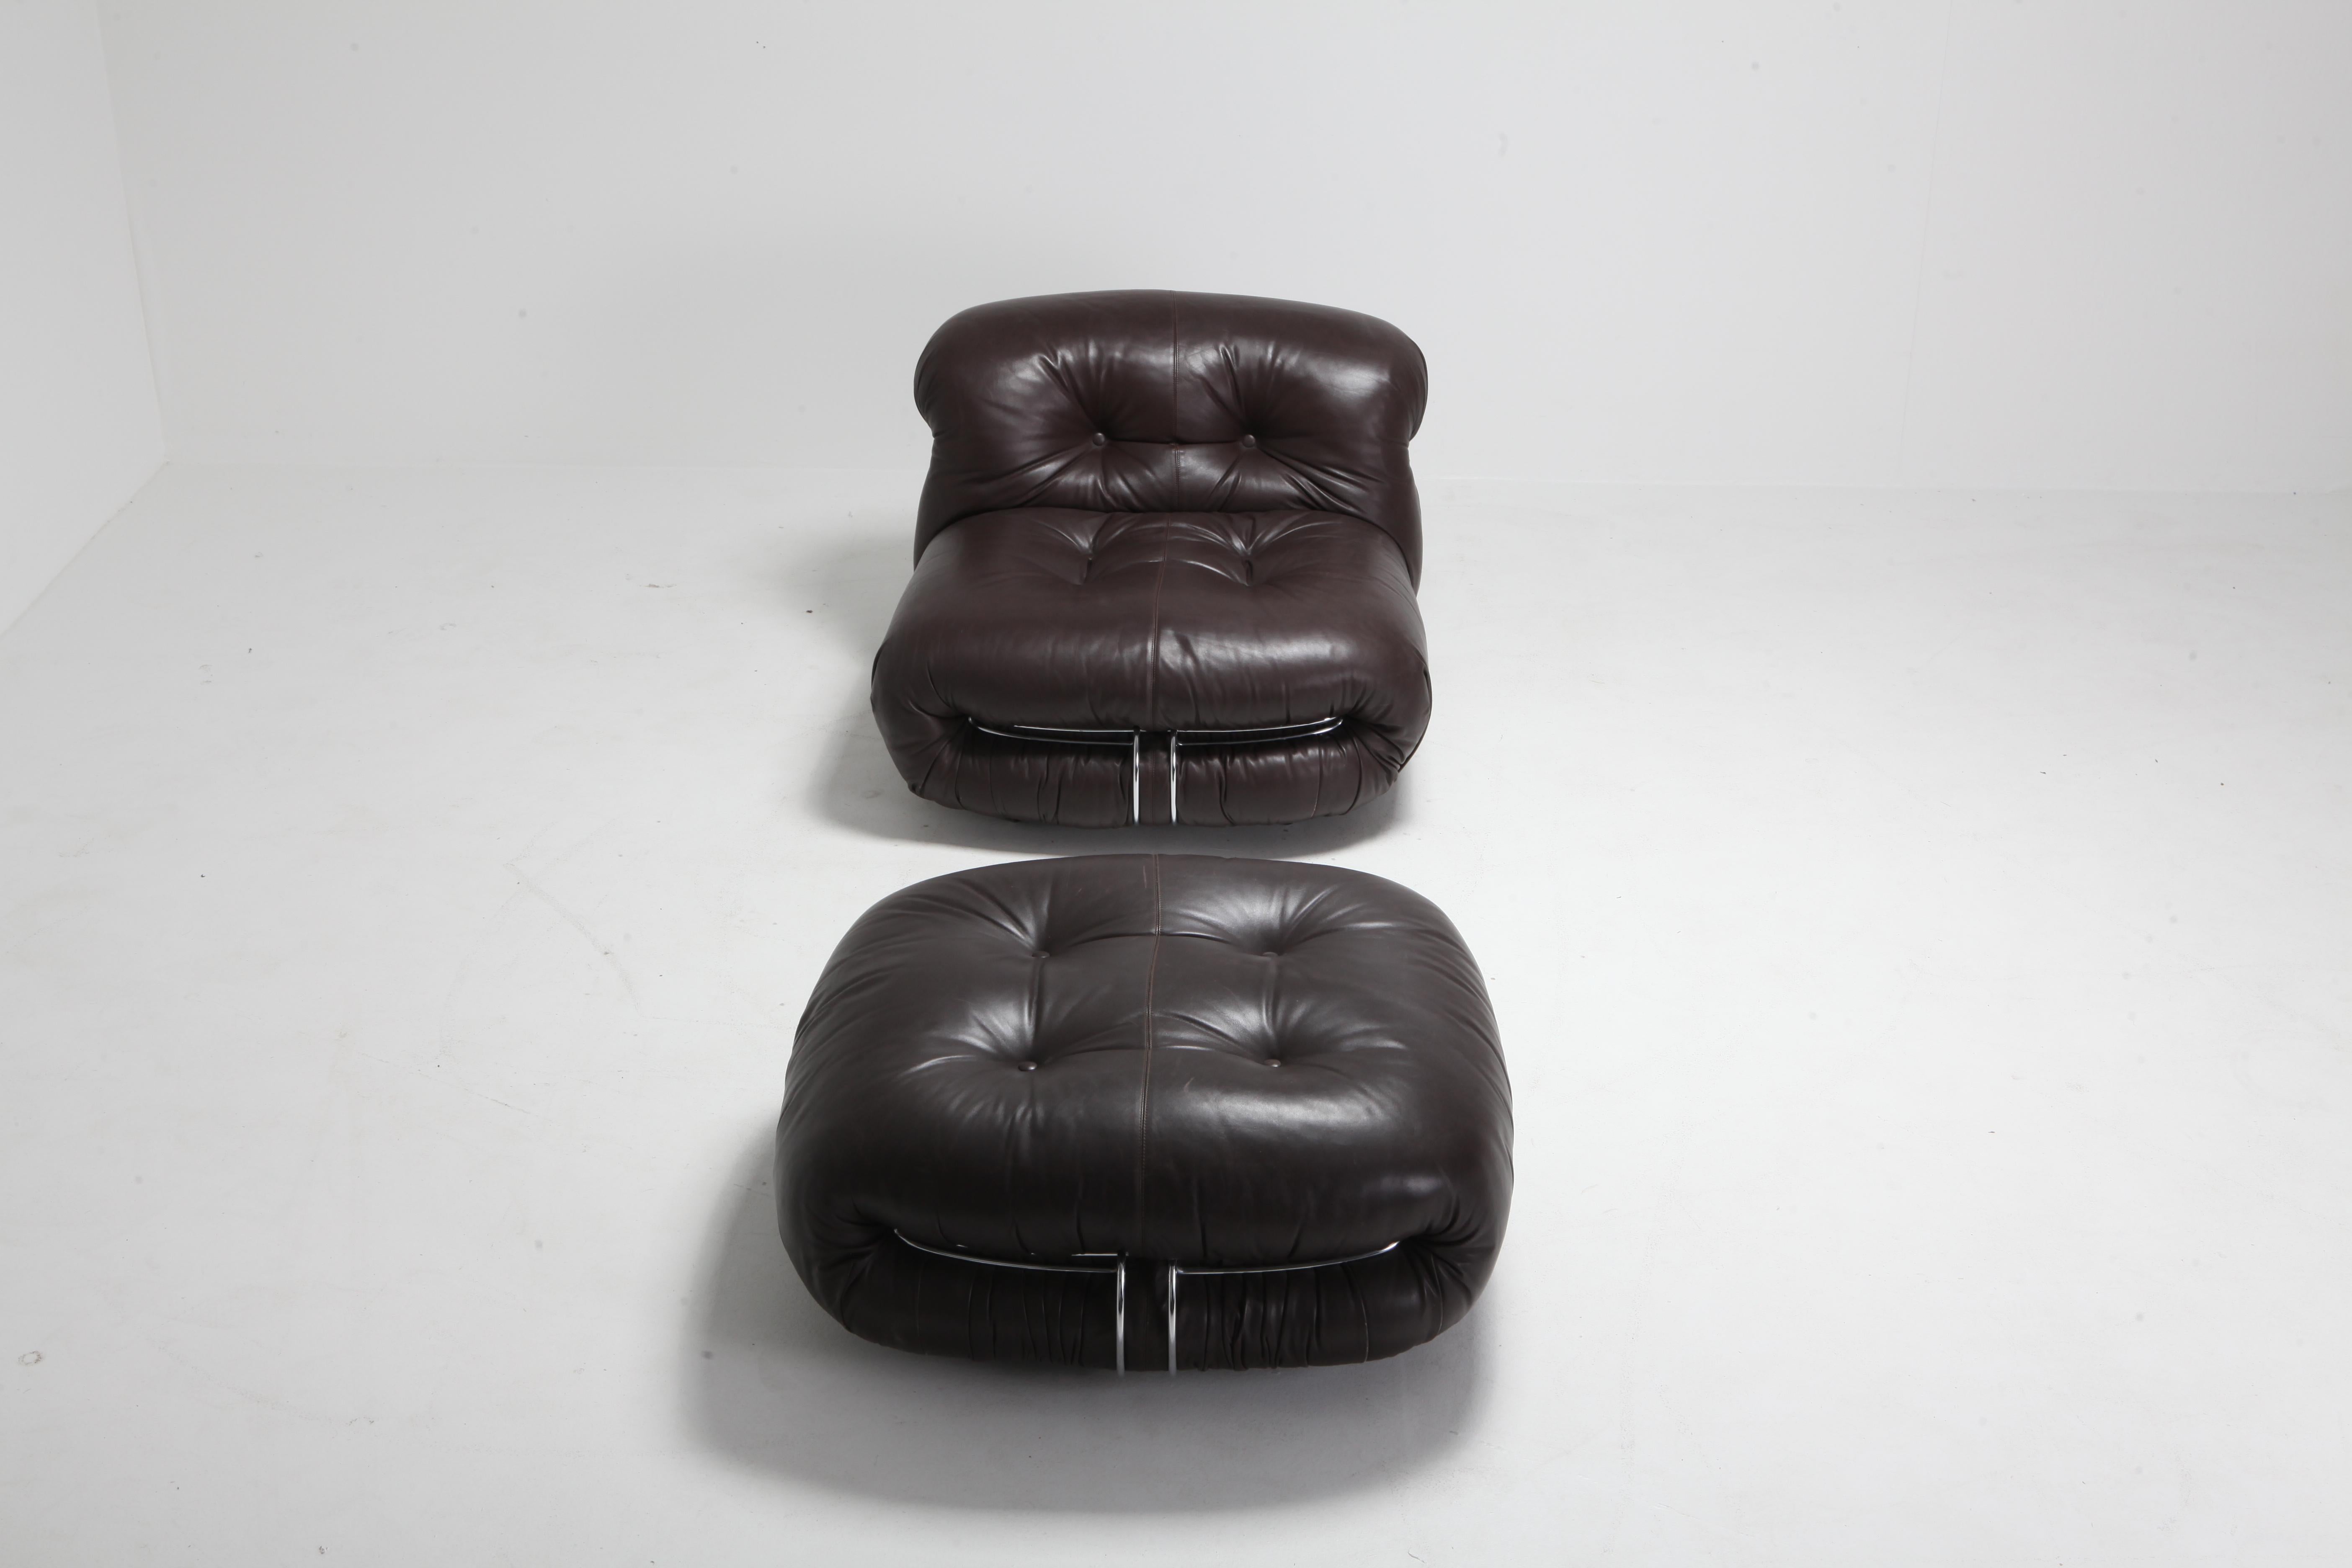 Chrome Scarpa 'Soriana' Brown Leather Lounge Chair with Ottoman